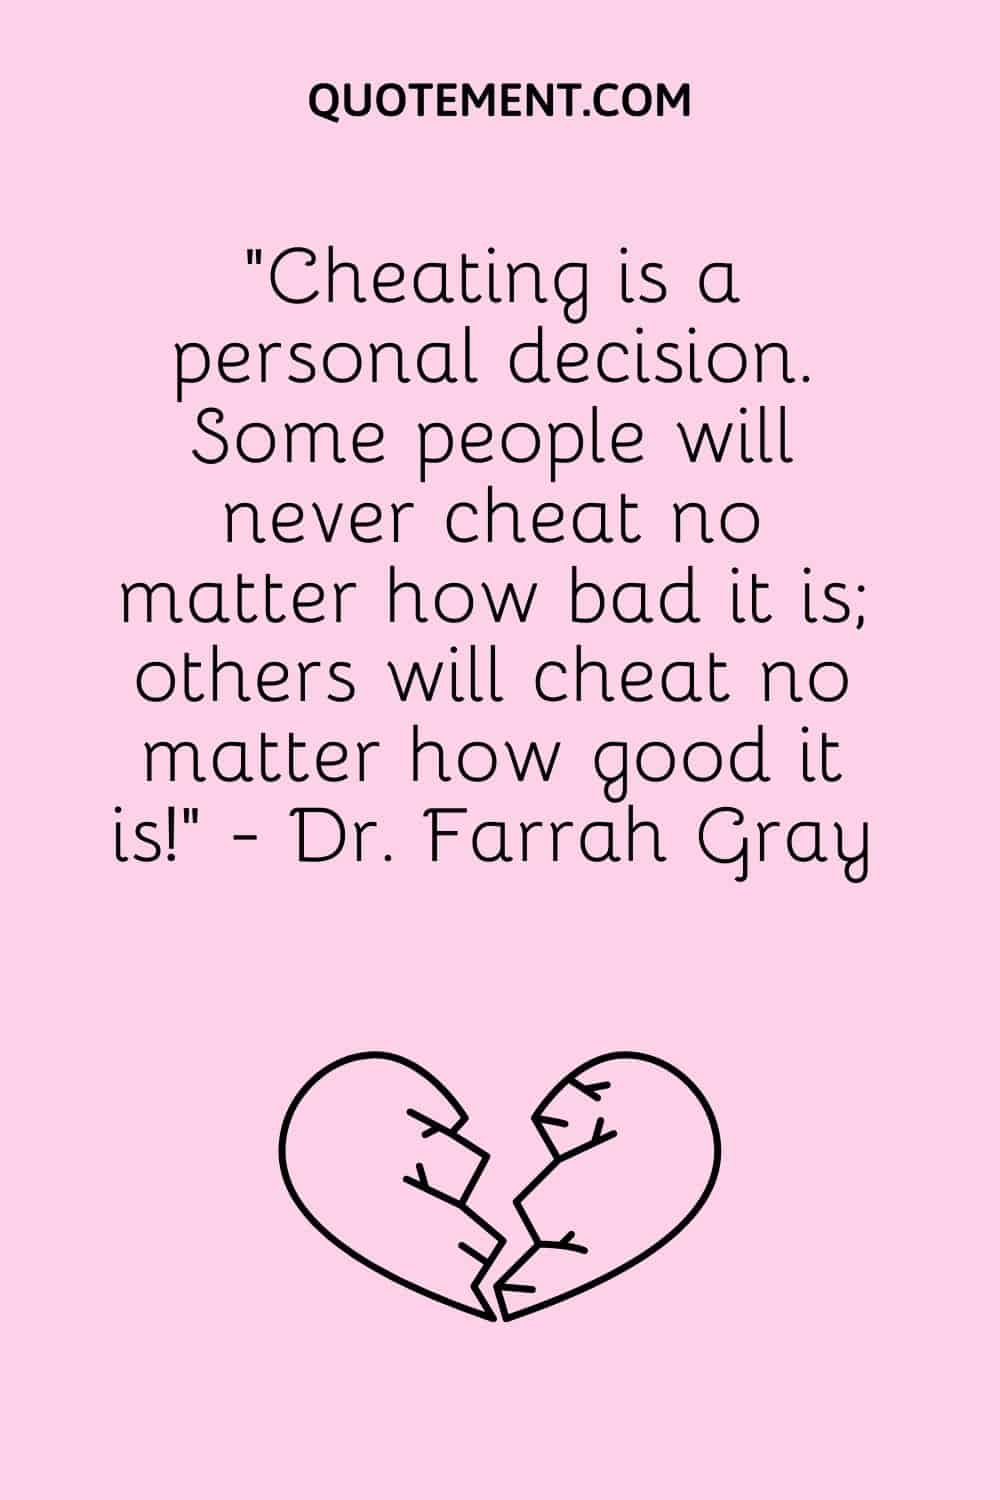 “Cheating is a personal decision. Some people will never cheat no matter how bad it is; others will cheat no matter how good it is!” - Dr. Farrah Gray